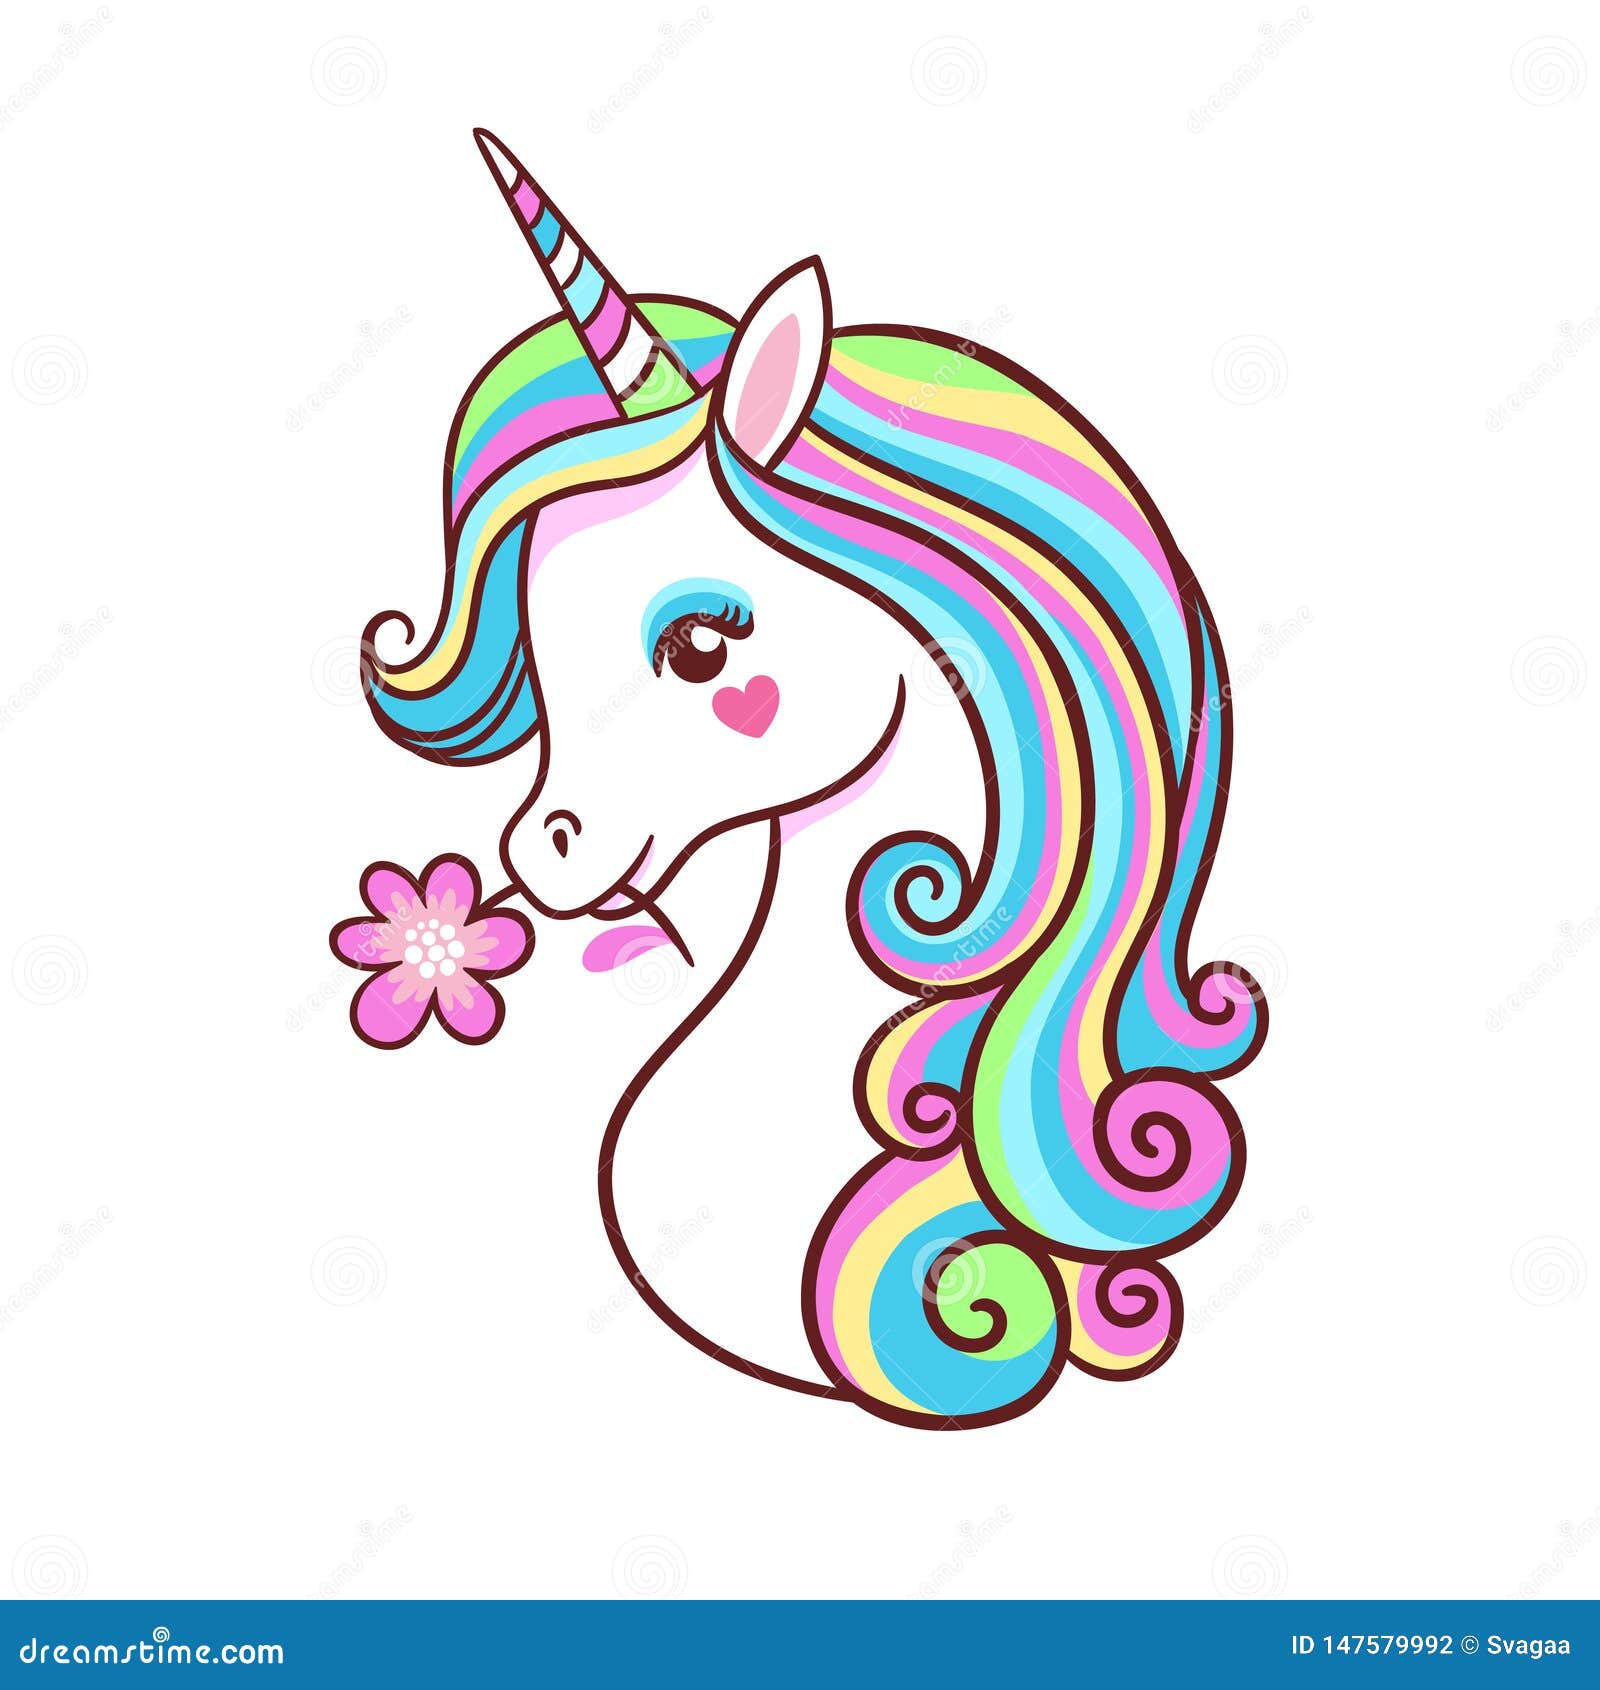 Greeting Card with Unicorn on a White Background. Stock Vector ...